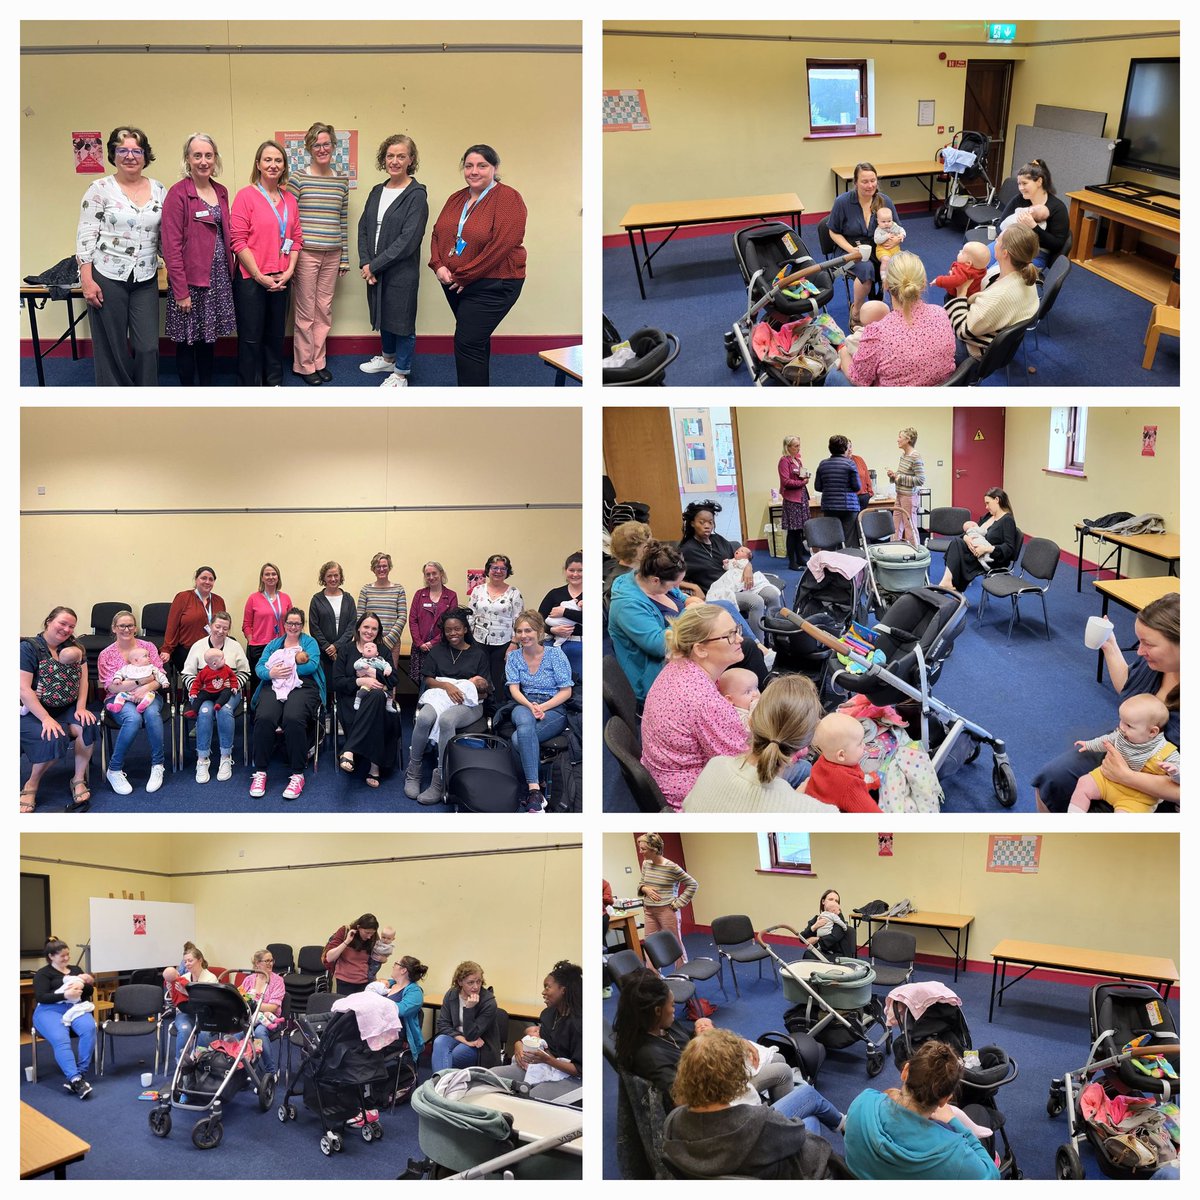 National Breastfeeding Week 1st - 7th October. Today, Lactation Consultants from Maternity Dept, UHG, celebrated by holding a gathering offsite at Westside Library in collaboration with the voluntary support group leaders of La Leche League/Cuidiu Galway.